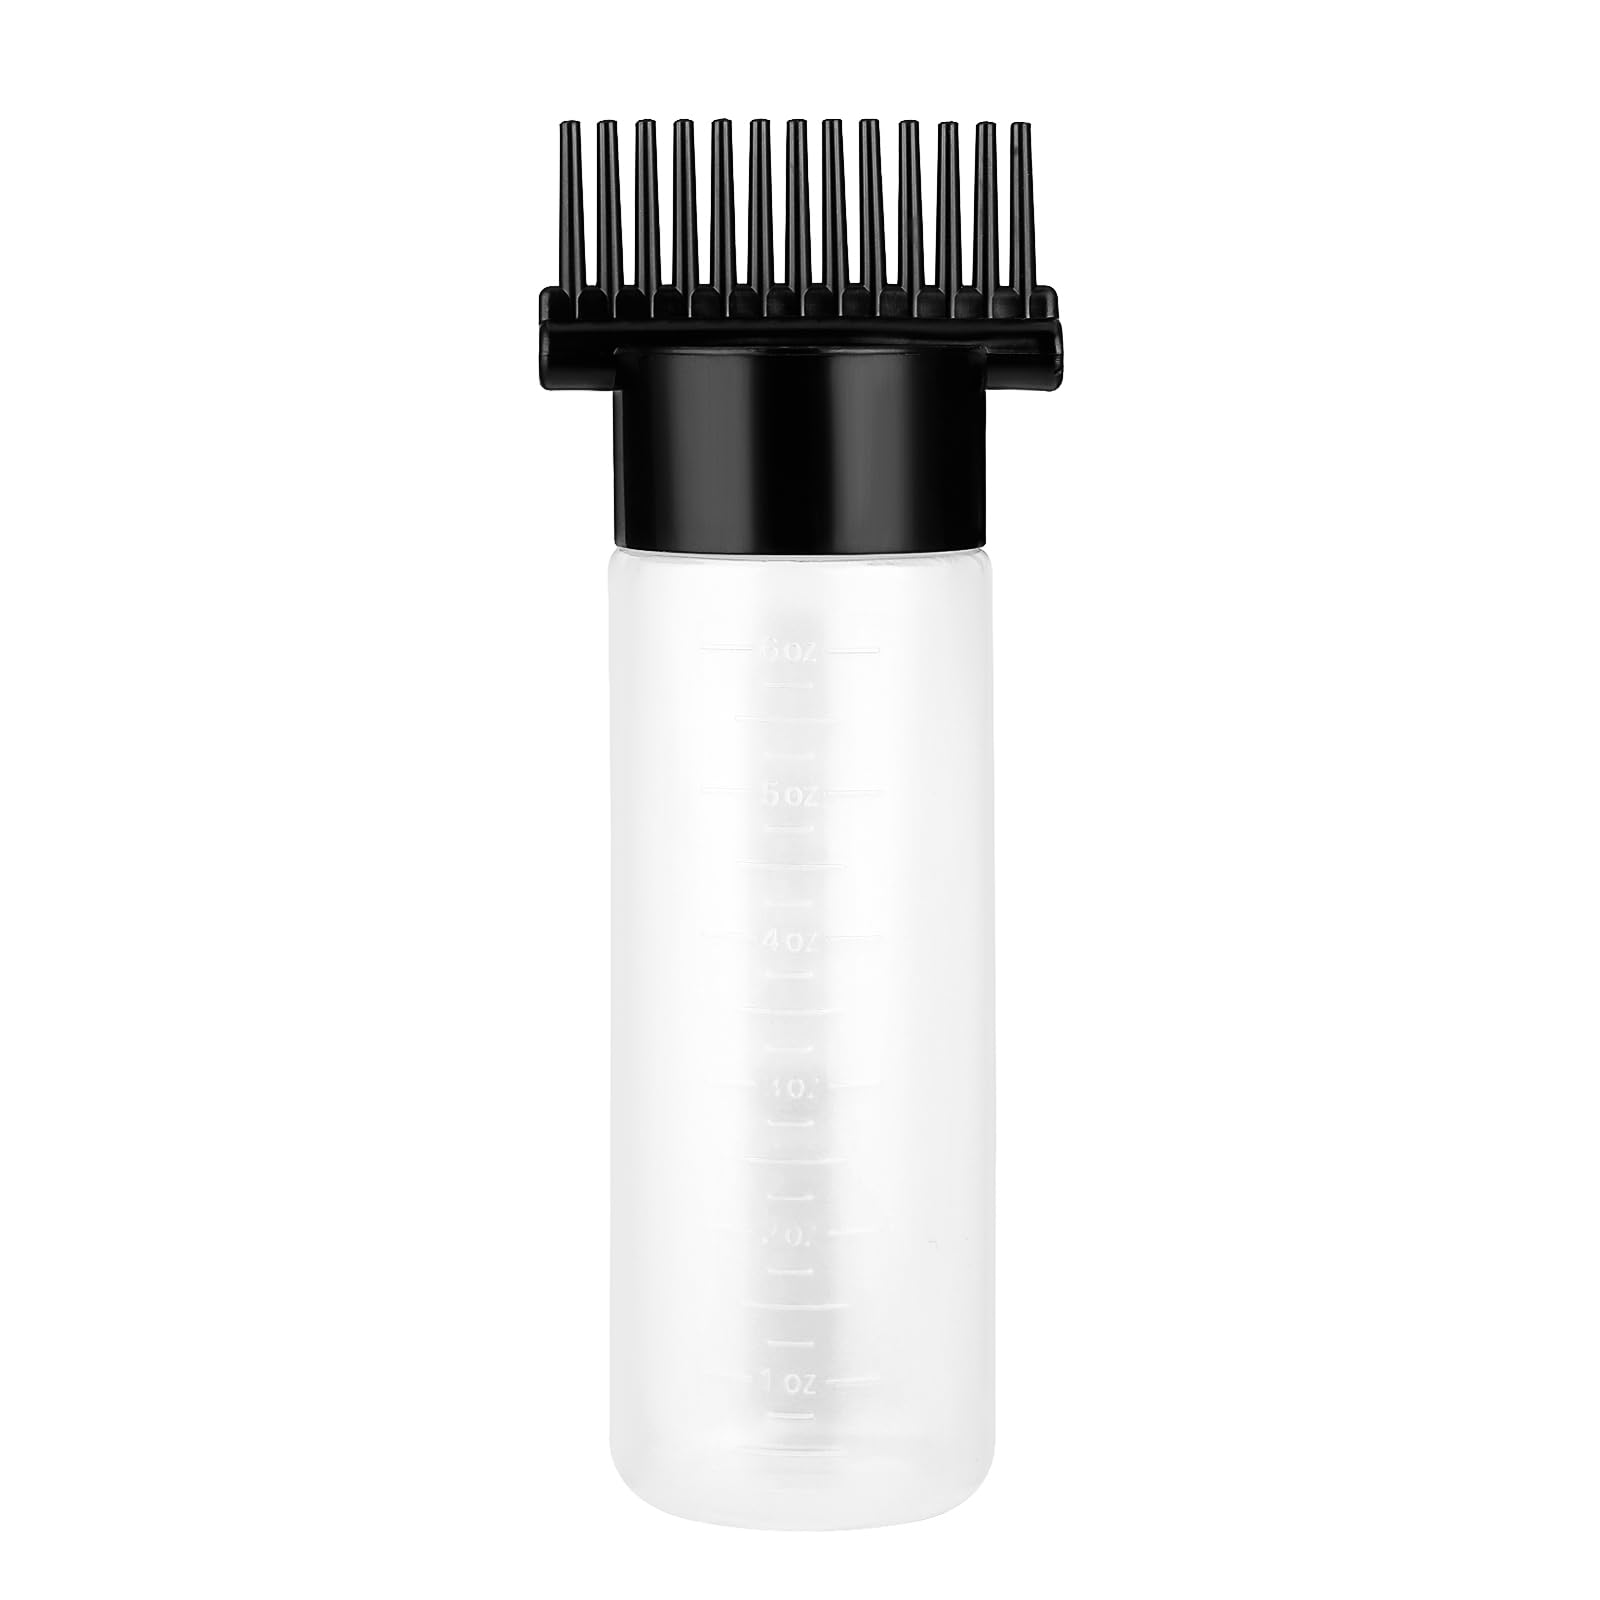 Sibba Root Comb Applicator Bottle, 6 Ounce Hair Oil Applicator Applicator  Bottle for Hair Dye Bottle Applicator Brush with Graduated S